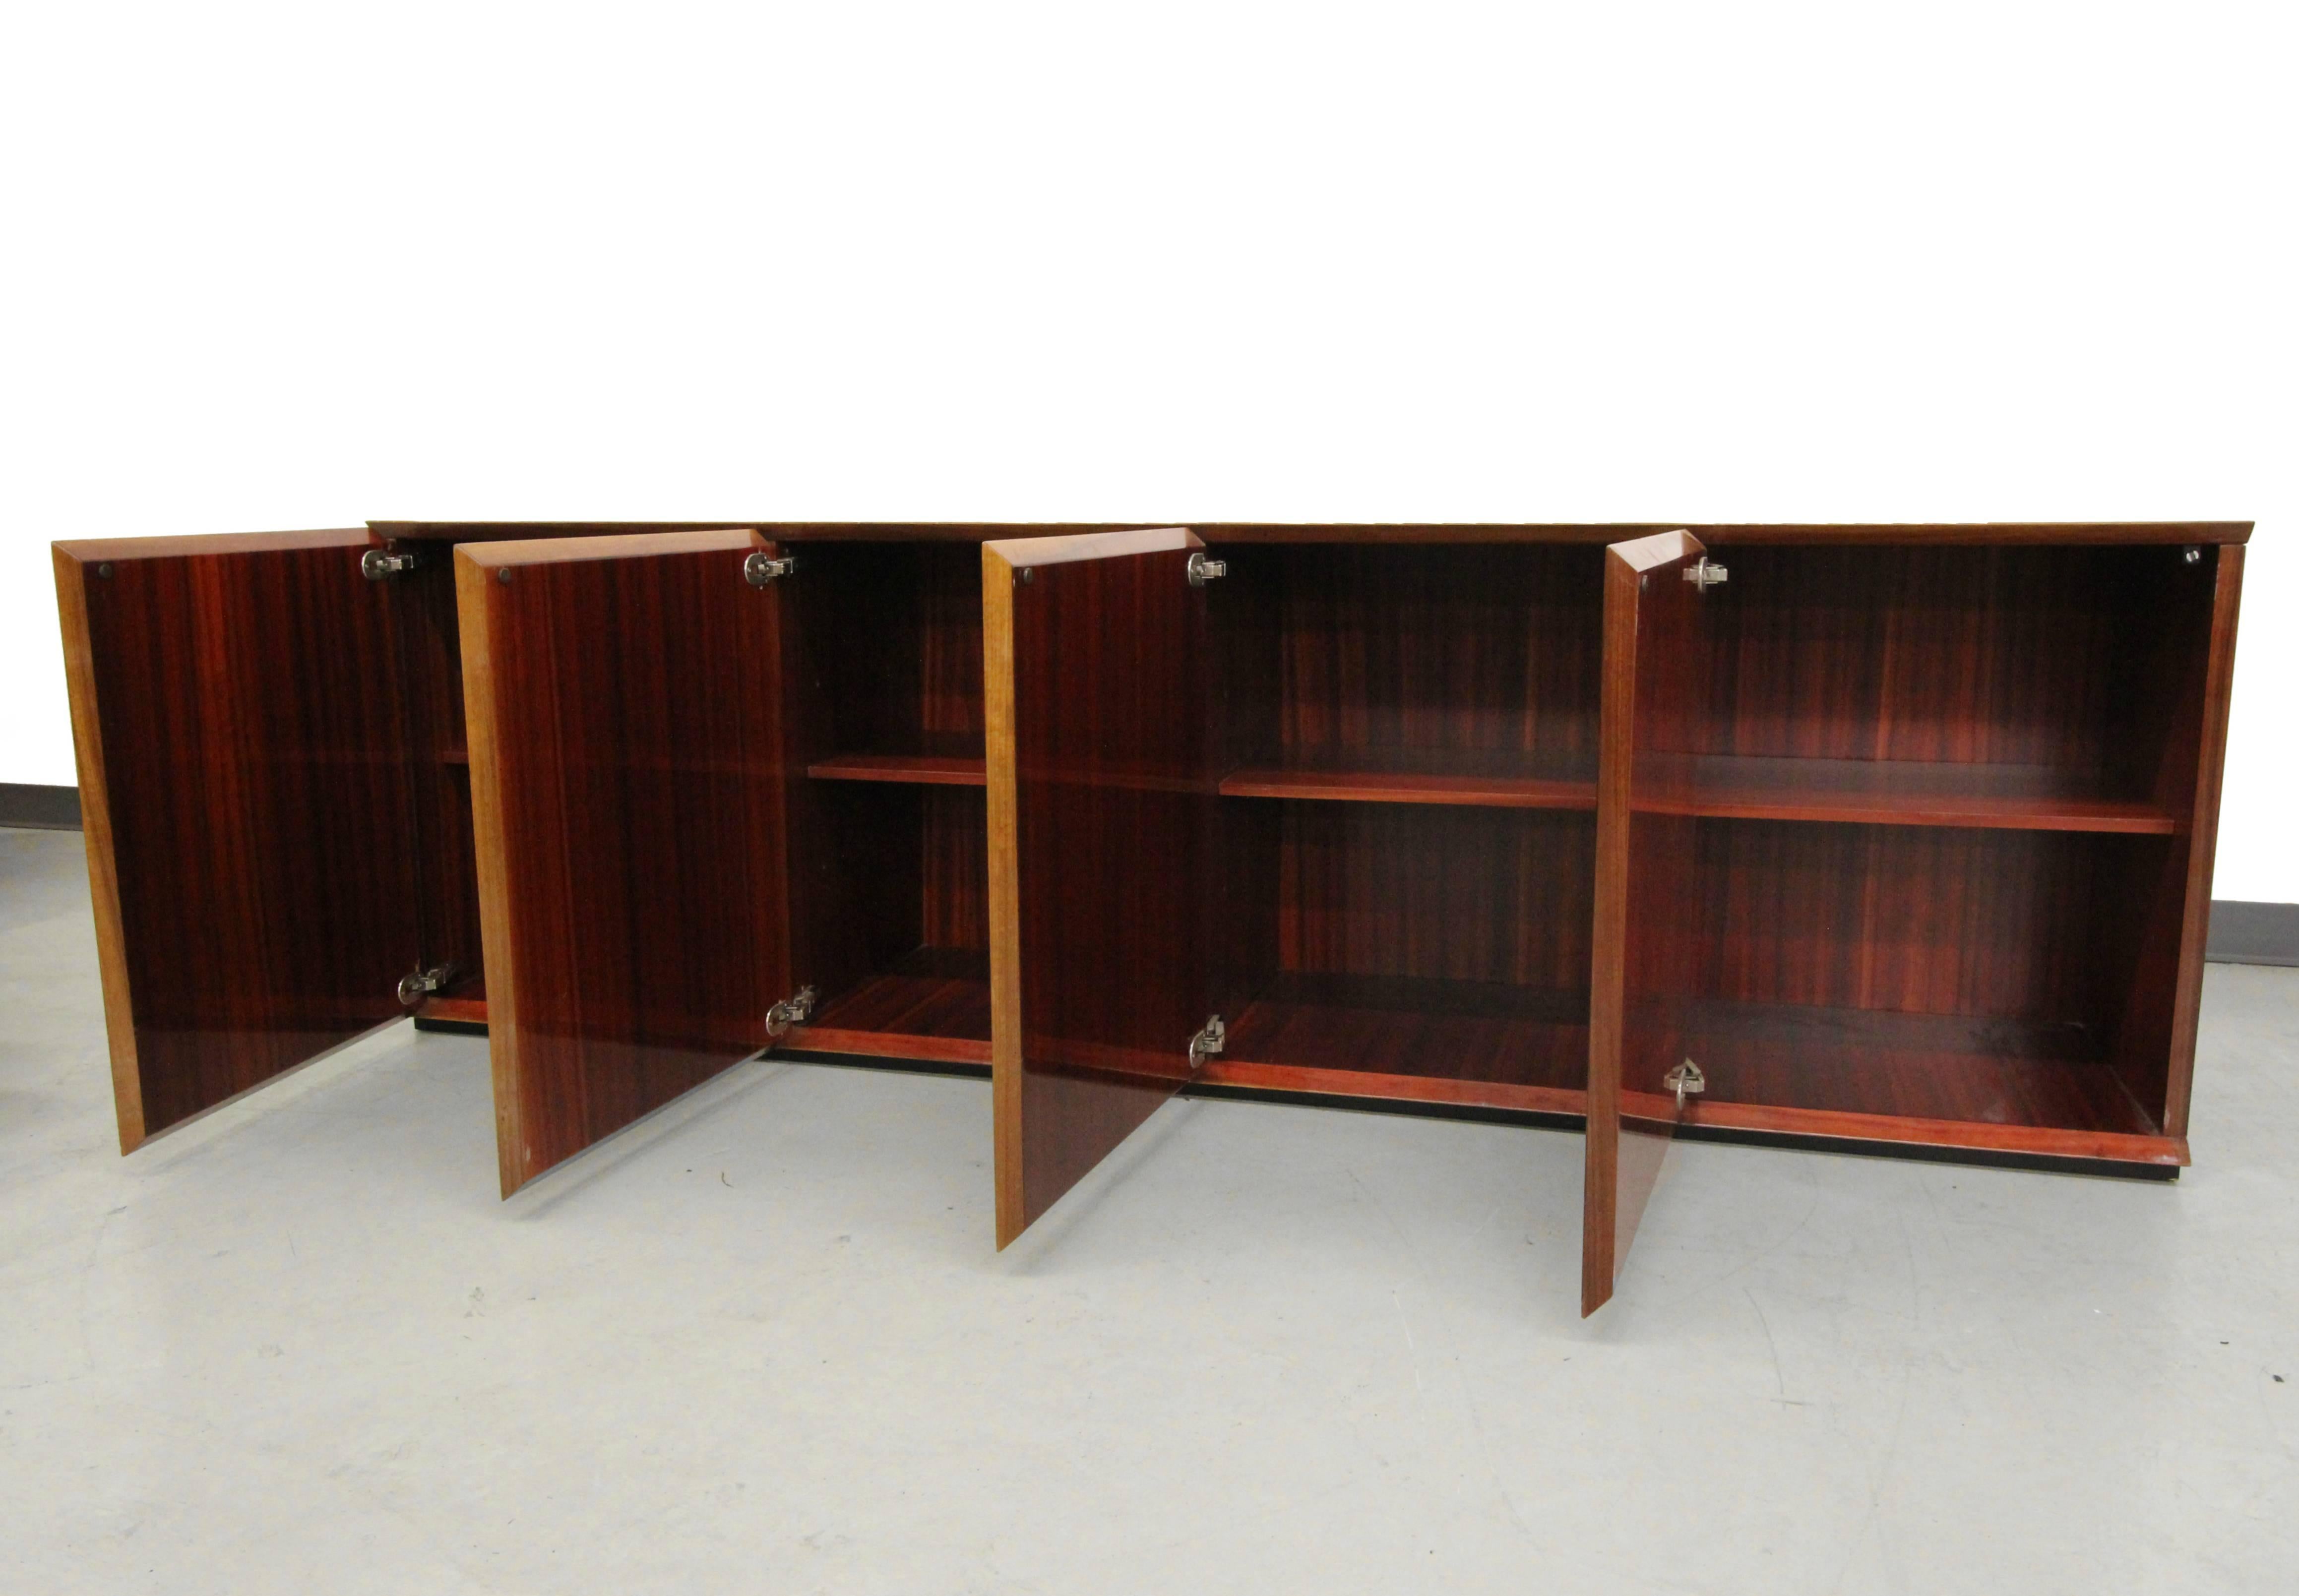 Monumental Italian Lacquered Zebrawood Credenza Buffet 2